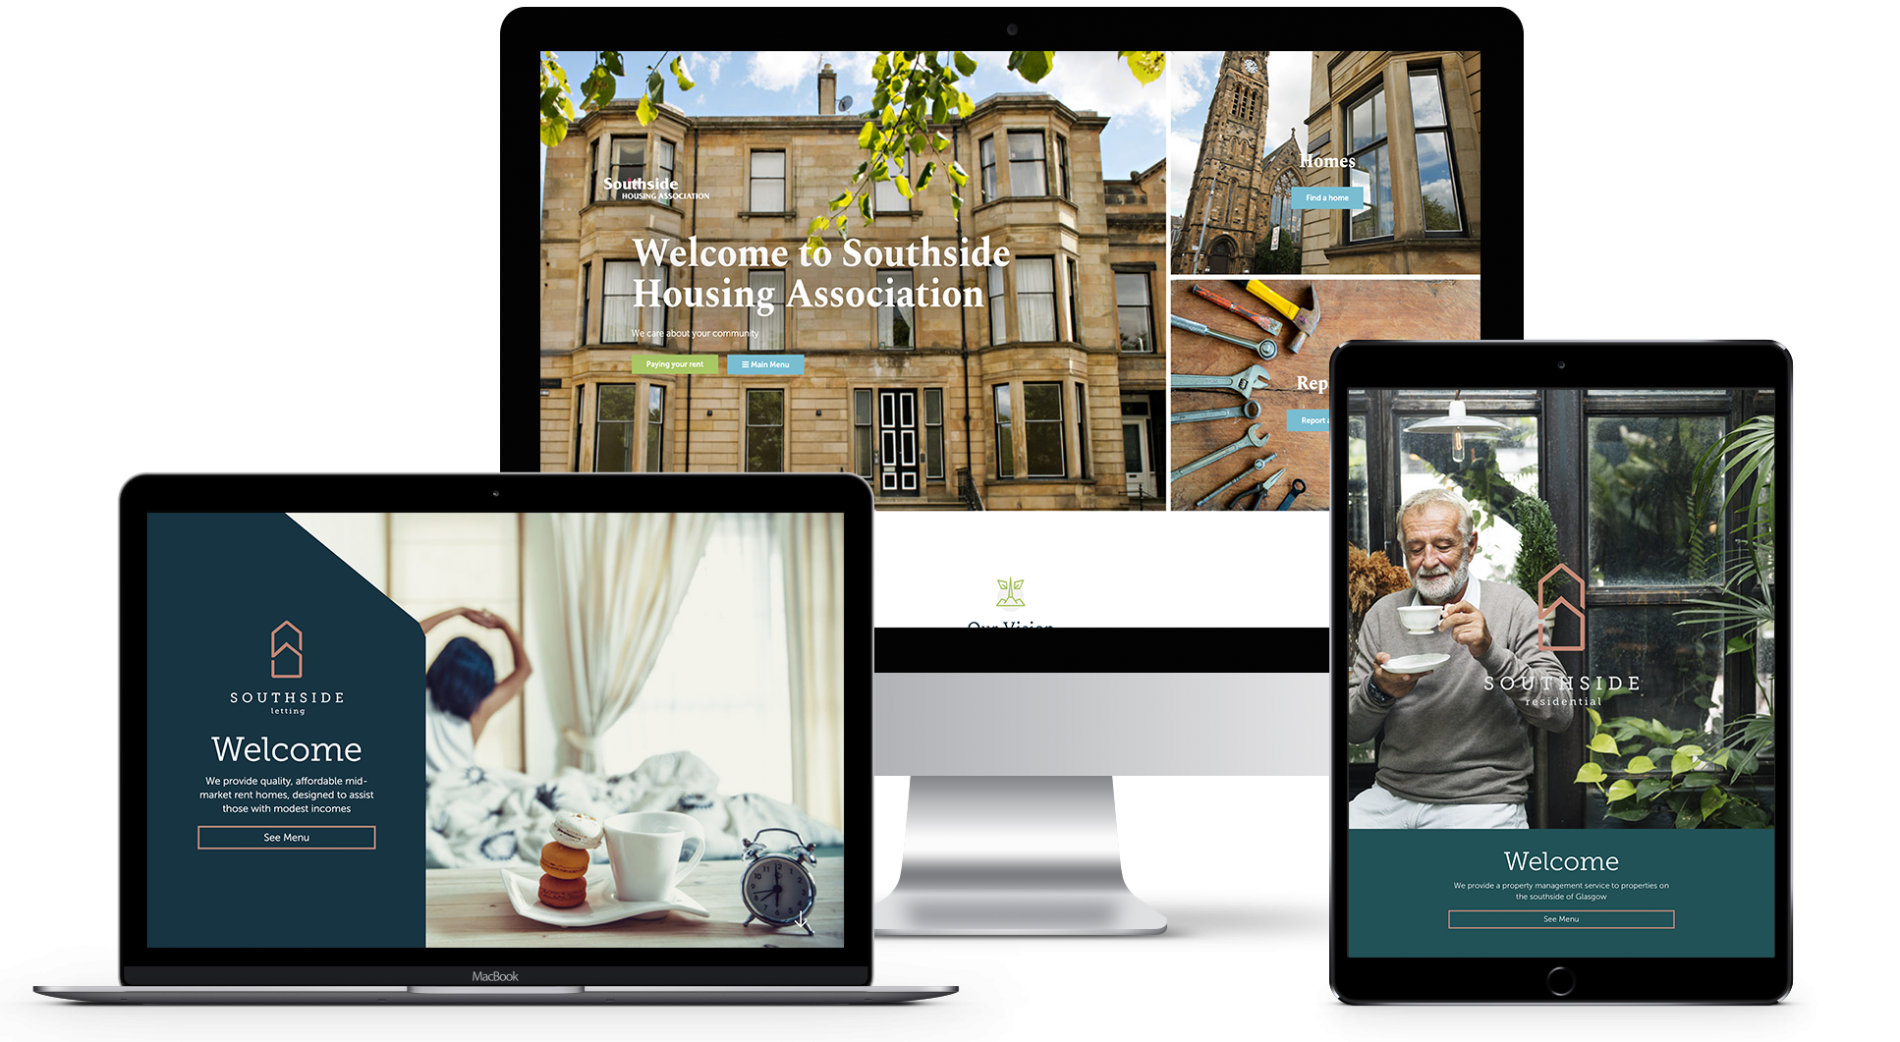 New website launched by Southside Housing Association